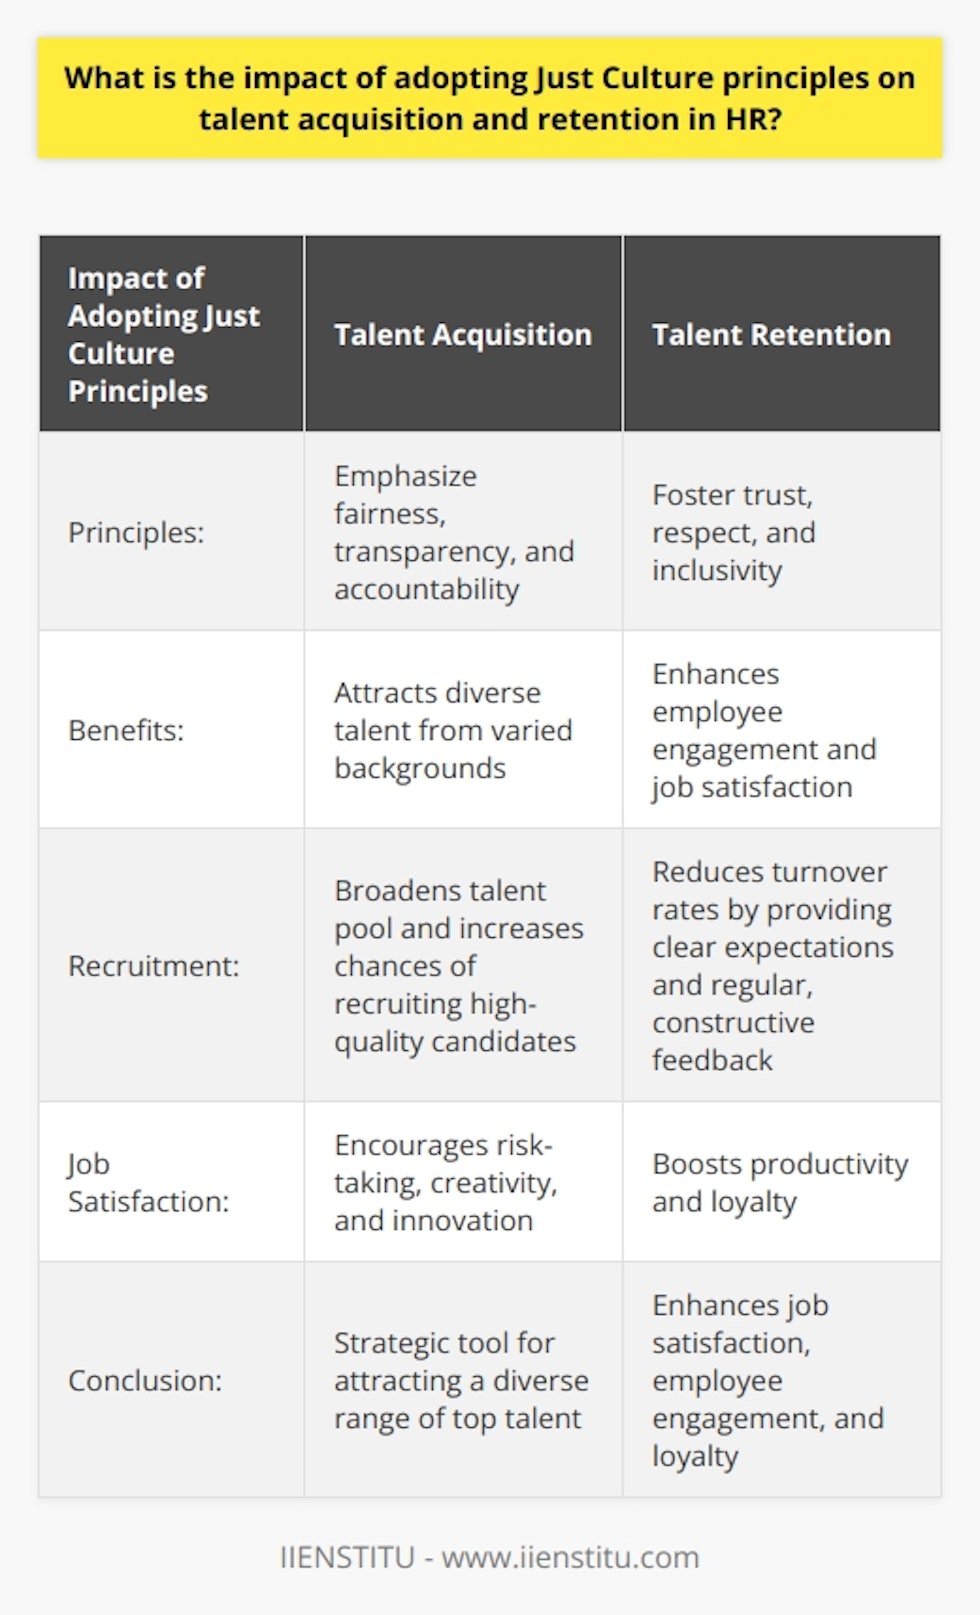 Adopting Just Culture principles has a significant impact on talent acquisition and retention in HR. Just Culture principles emphasize fairness, transparency, and accountability, which are values that job seekers today highly value in an organization.When organizations adopt Just Culture principles, they create an inclusive environment where every employee's opinion is valued. This fosters a sense of respect and belonging, which appeals to diverse talent. By promoting fairness in decision-making and accountability for actions, organizations can attract top-notch professionals from varied backgrounds. This broadens the talent pool and increases the chances of recruiting high-quality candidates.In terms of talent retention, Just Culture principles play a pivotal role. By creating an environment of trust and respect, these principles enhance employee engagement and job satisfaction. Employees are more likely to stay in an organization where they feel valued and see growth potential. One way in which Just Culture principles prevent employee turnover is by providing clear expectations and regular, constructive feedback. This reduces uncertainties and frustrations that often lead to high turnover rates. Additionally, a Just Culture focuses on learning from mistakes rather than punitive actions. Employees feel encouraged to take risks, be creative, and innovate, as they are not afraid of severe consequences for their mistakes.Moreover, a sense of justice and fair treatment leads to increased job satisfaction. When employees believe their organization treats them impartially, they feel happier and more fulfilled. This, in turn, boosts productivity and loyalty, further increasing the chances of talent retention.In conclusion, adopting Just Culture principles has a profound positive effect on both talent acquisition and retention in HR. These principles not only attract a diverse range of top talent but also enhance job satisfaction, employee engagement, and loyalty. As a result, Just Culture principles are a strategic tool for HR in both attracting and retaining high-level talent.